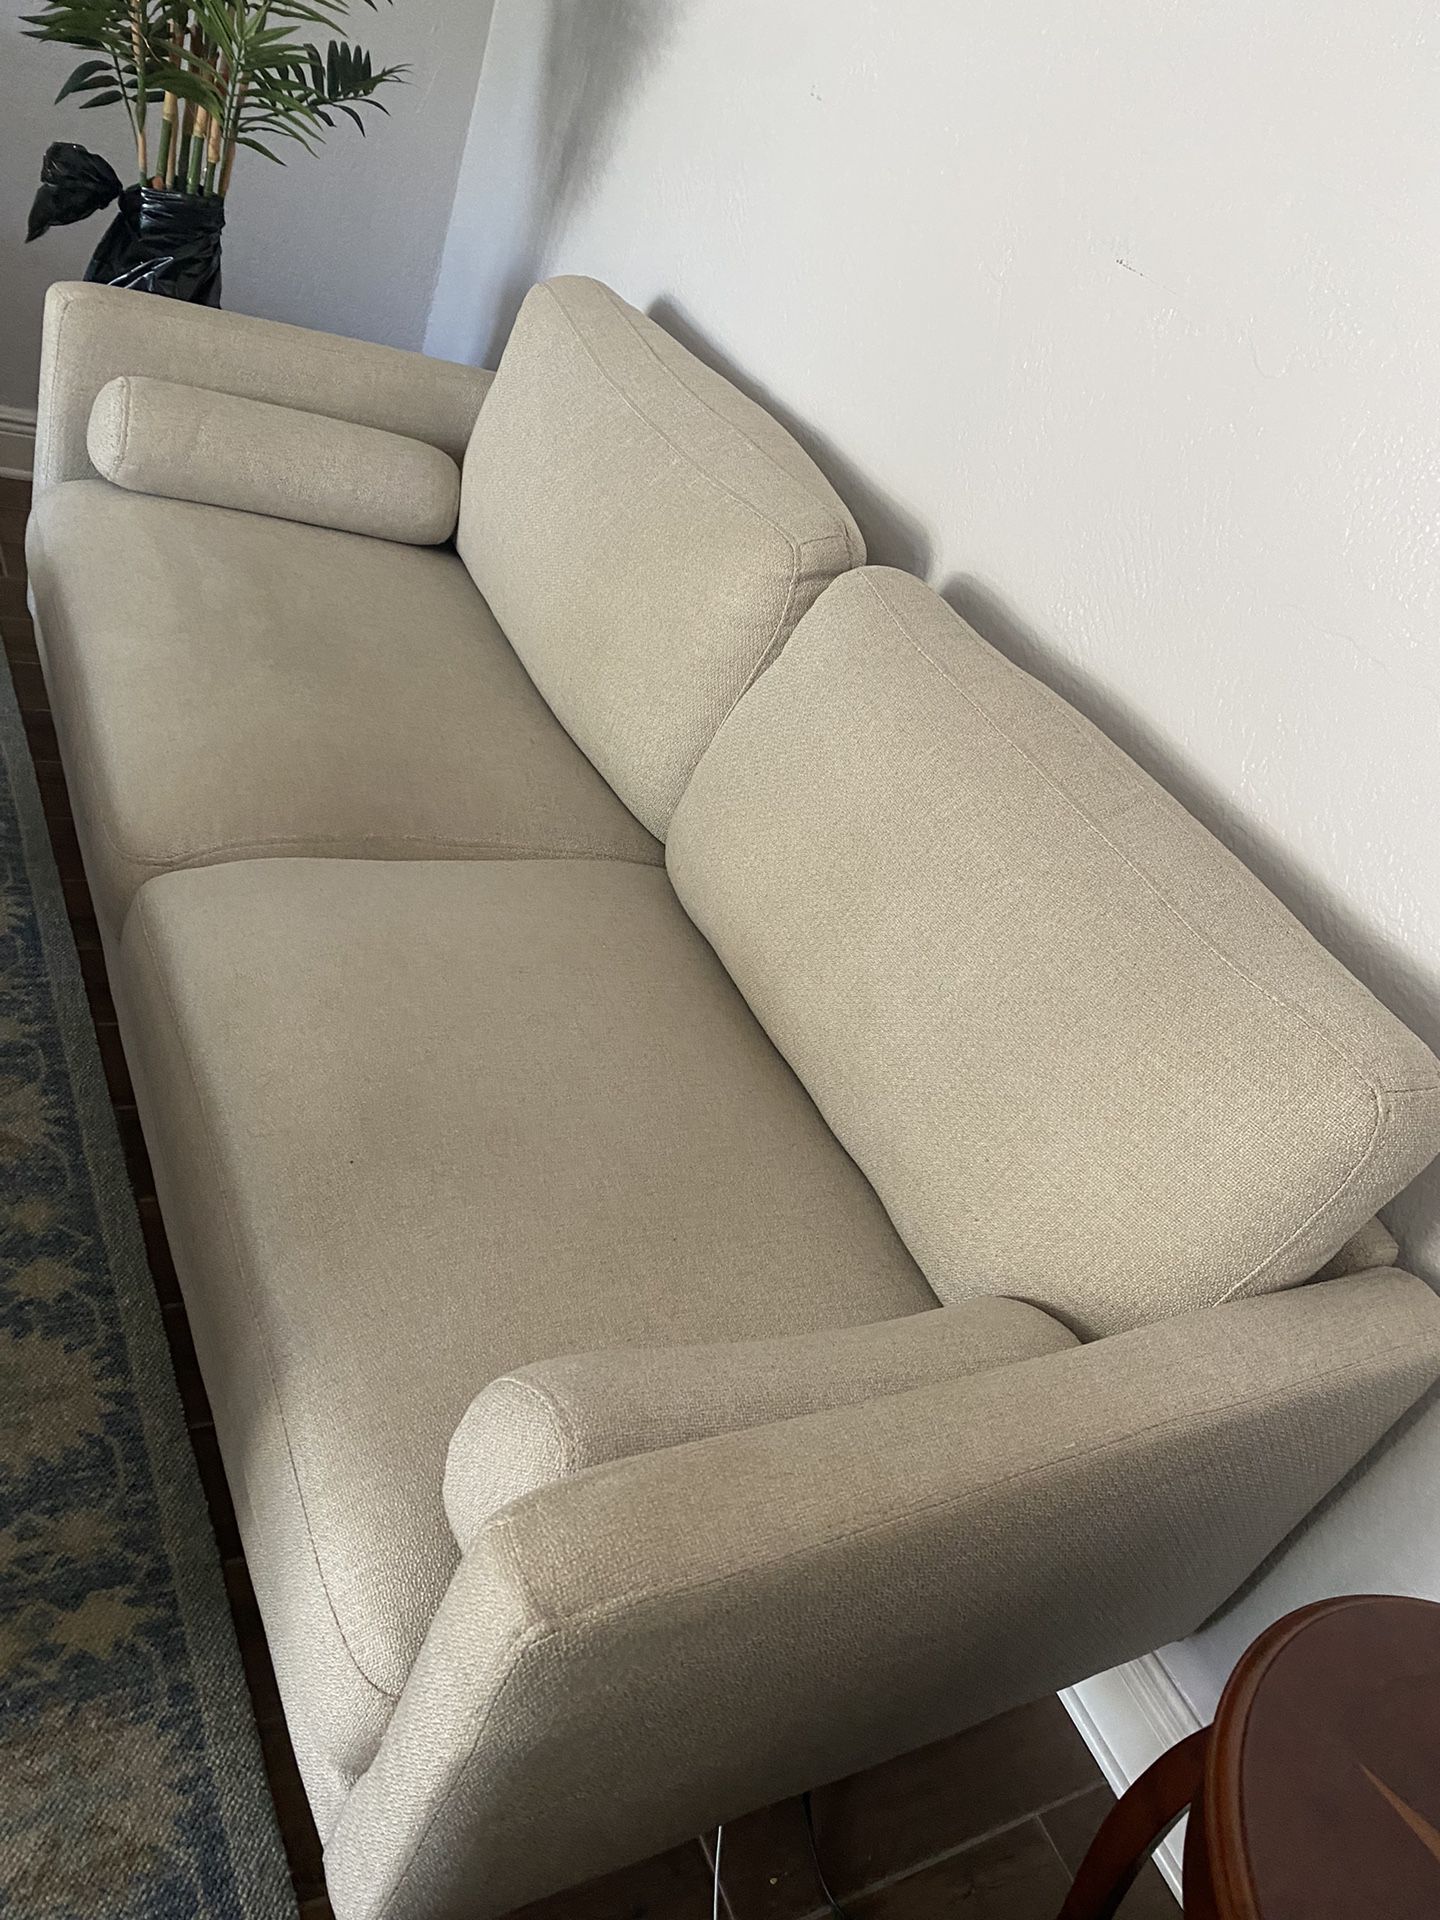 Available On 4/26: Beige Colored Couch